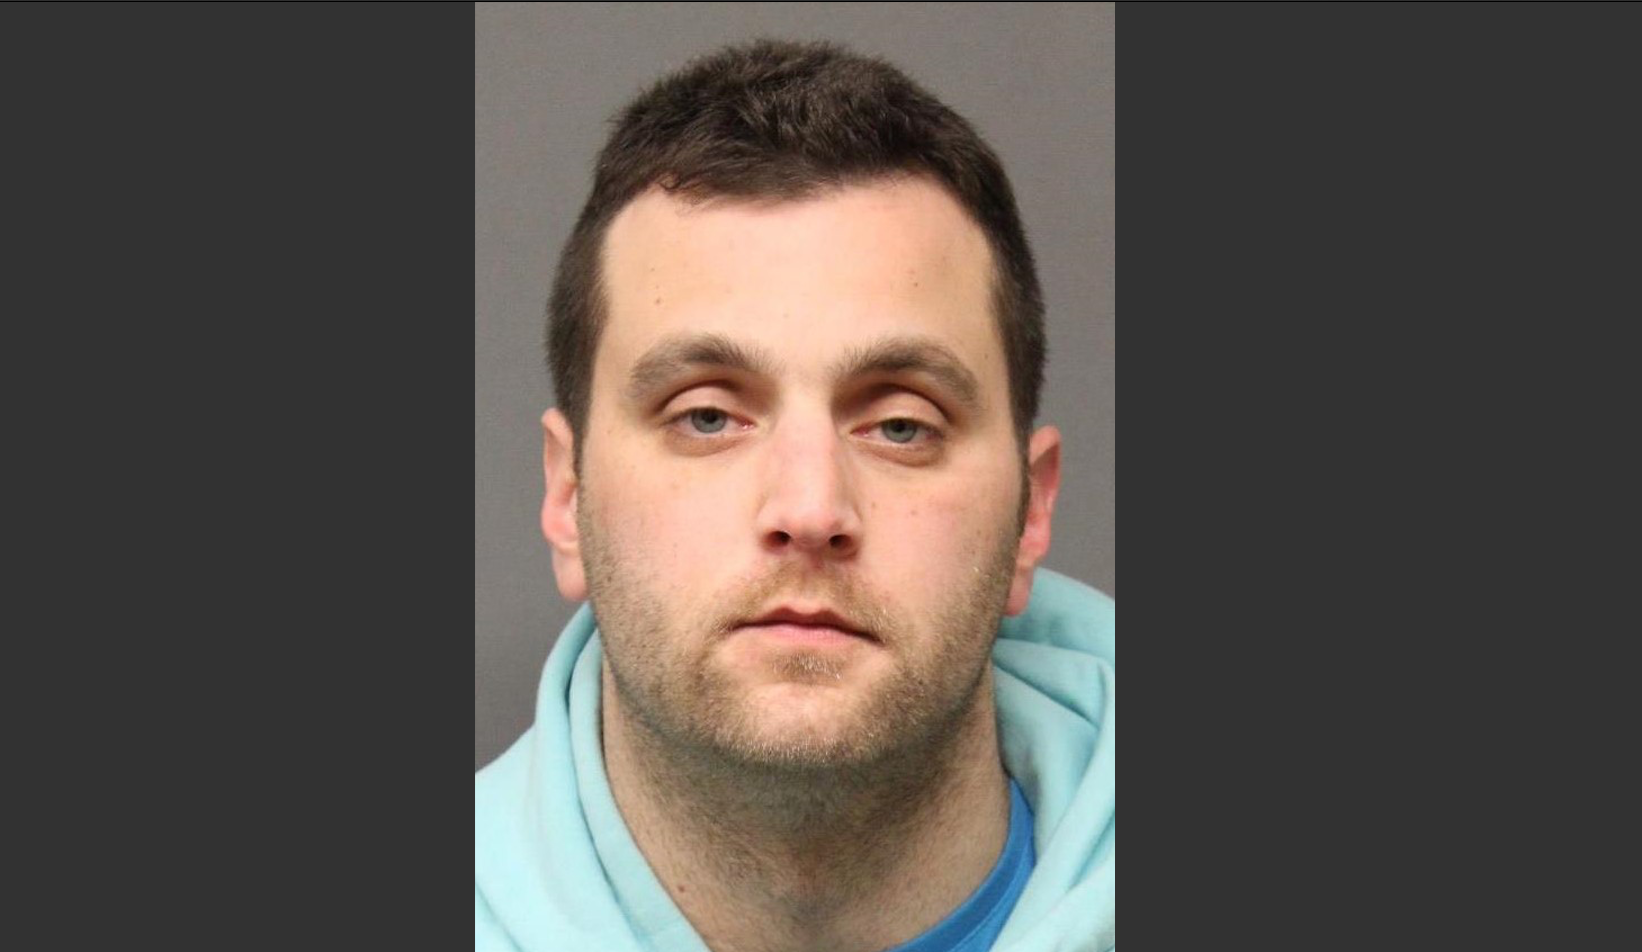 Autumn Homemade Meth Porn - Township man adds child porn to his list of charges over meth, Xanax, GHB â€”  Pascack Press & Northern Valley Press